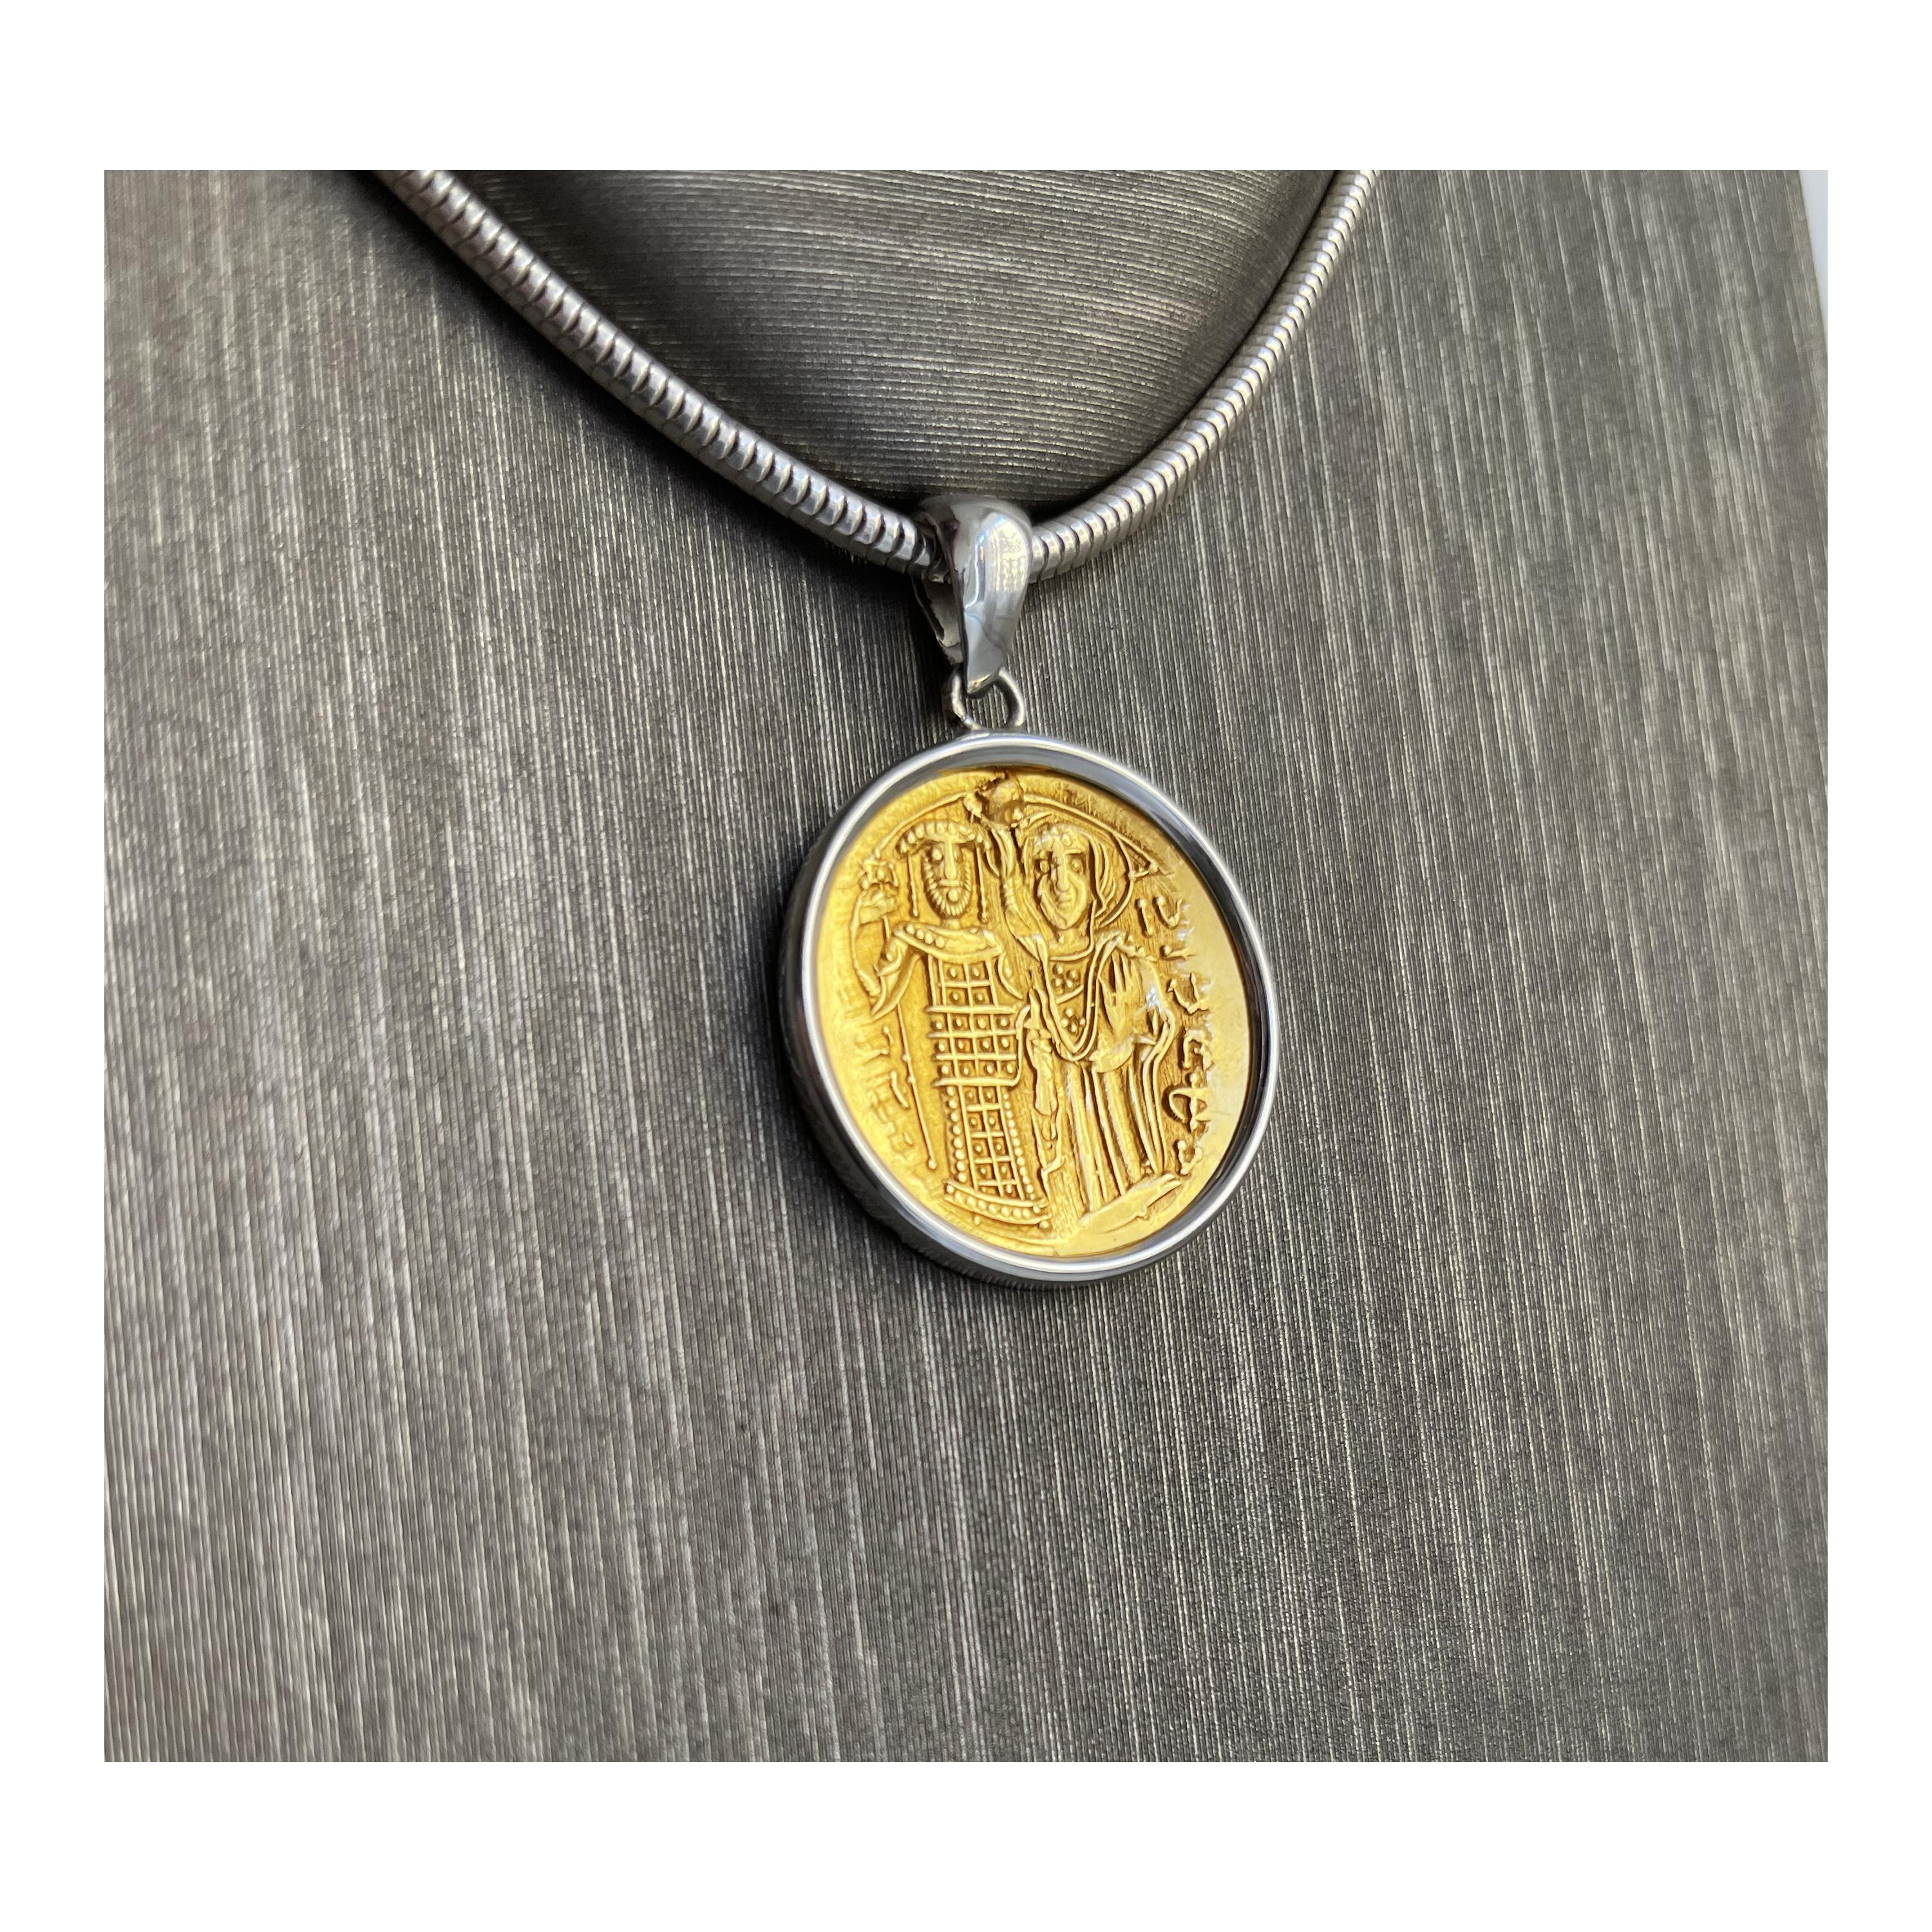 A 20 kt gold Byzantine coin depicting Emperor John III (1222-1254 AD) crowned by the Virgin Mary is set in a  sterling silver pendant ; in the reverse side of the coin there is Christ Pantocrator enthroned facing.
John III Doukas Vatatzes, was